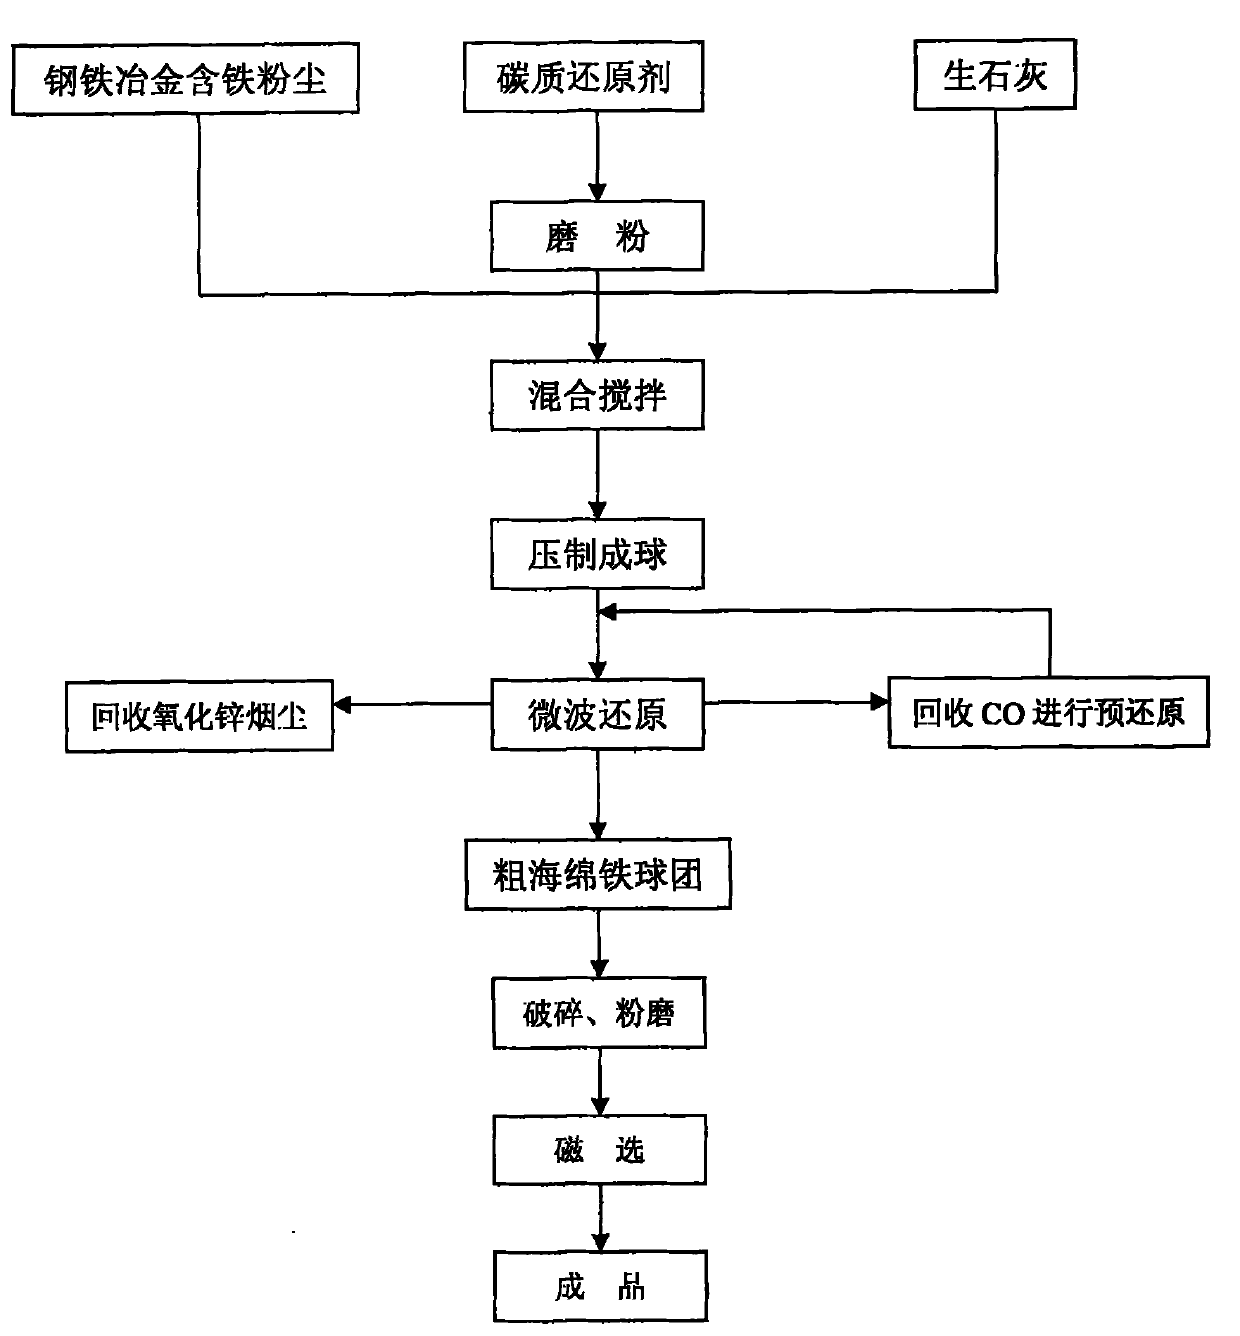 Process for directly producing sponge iron by microwave carbothermal reduction steel metallurgical iron-bearing dust